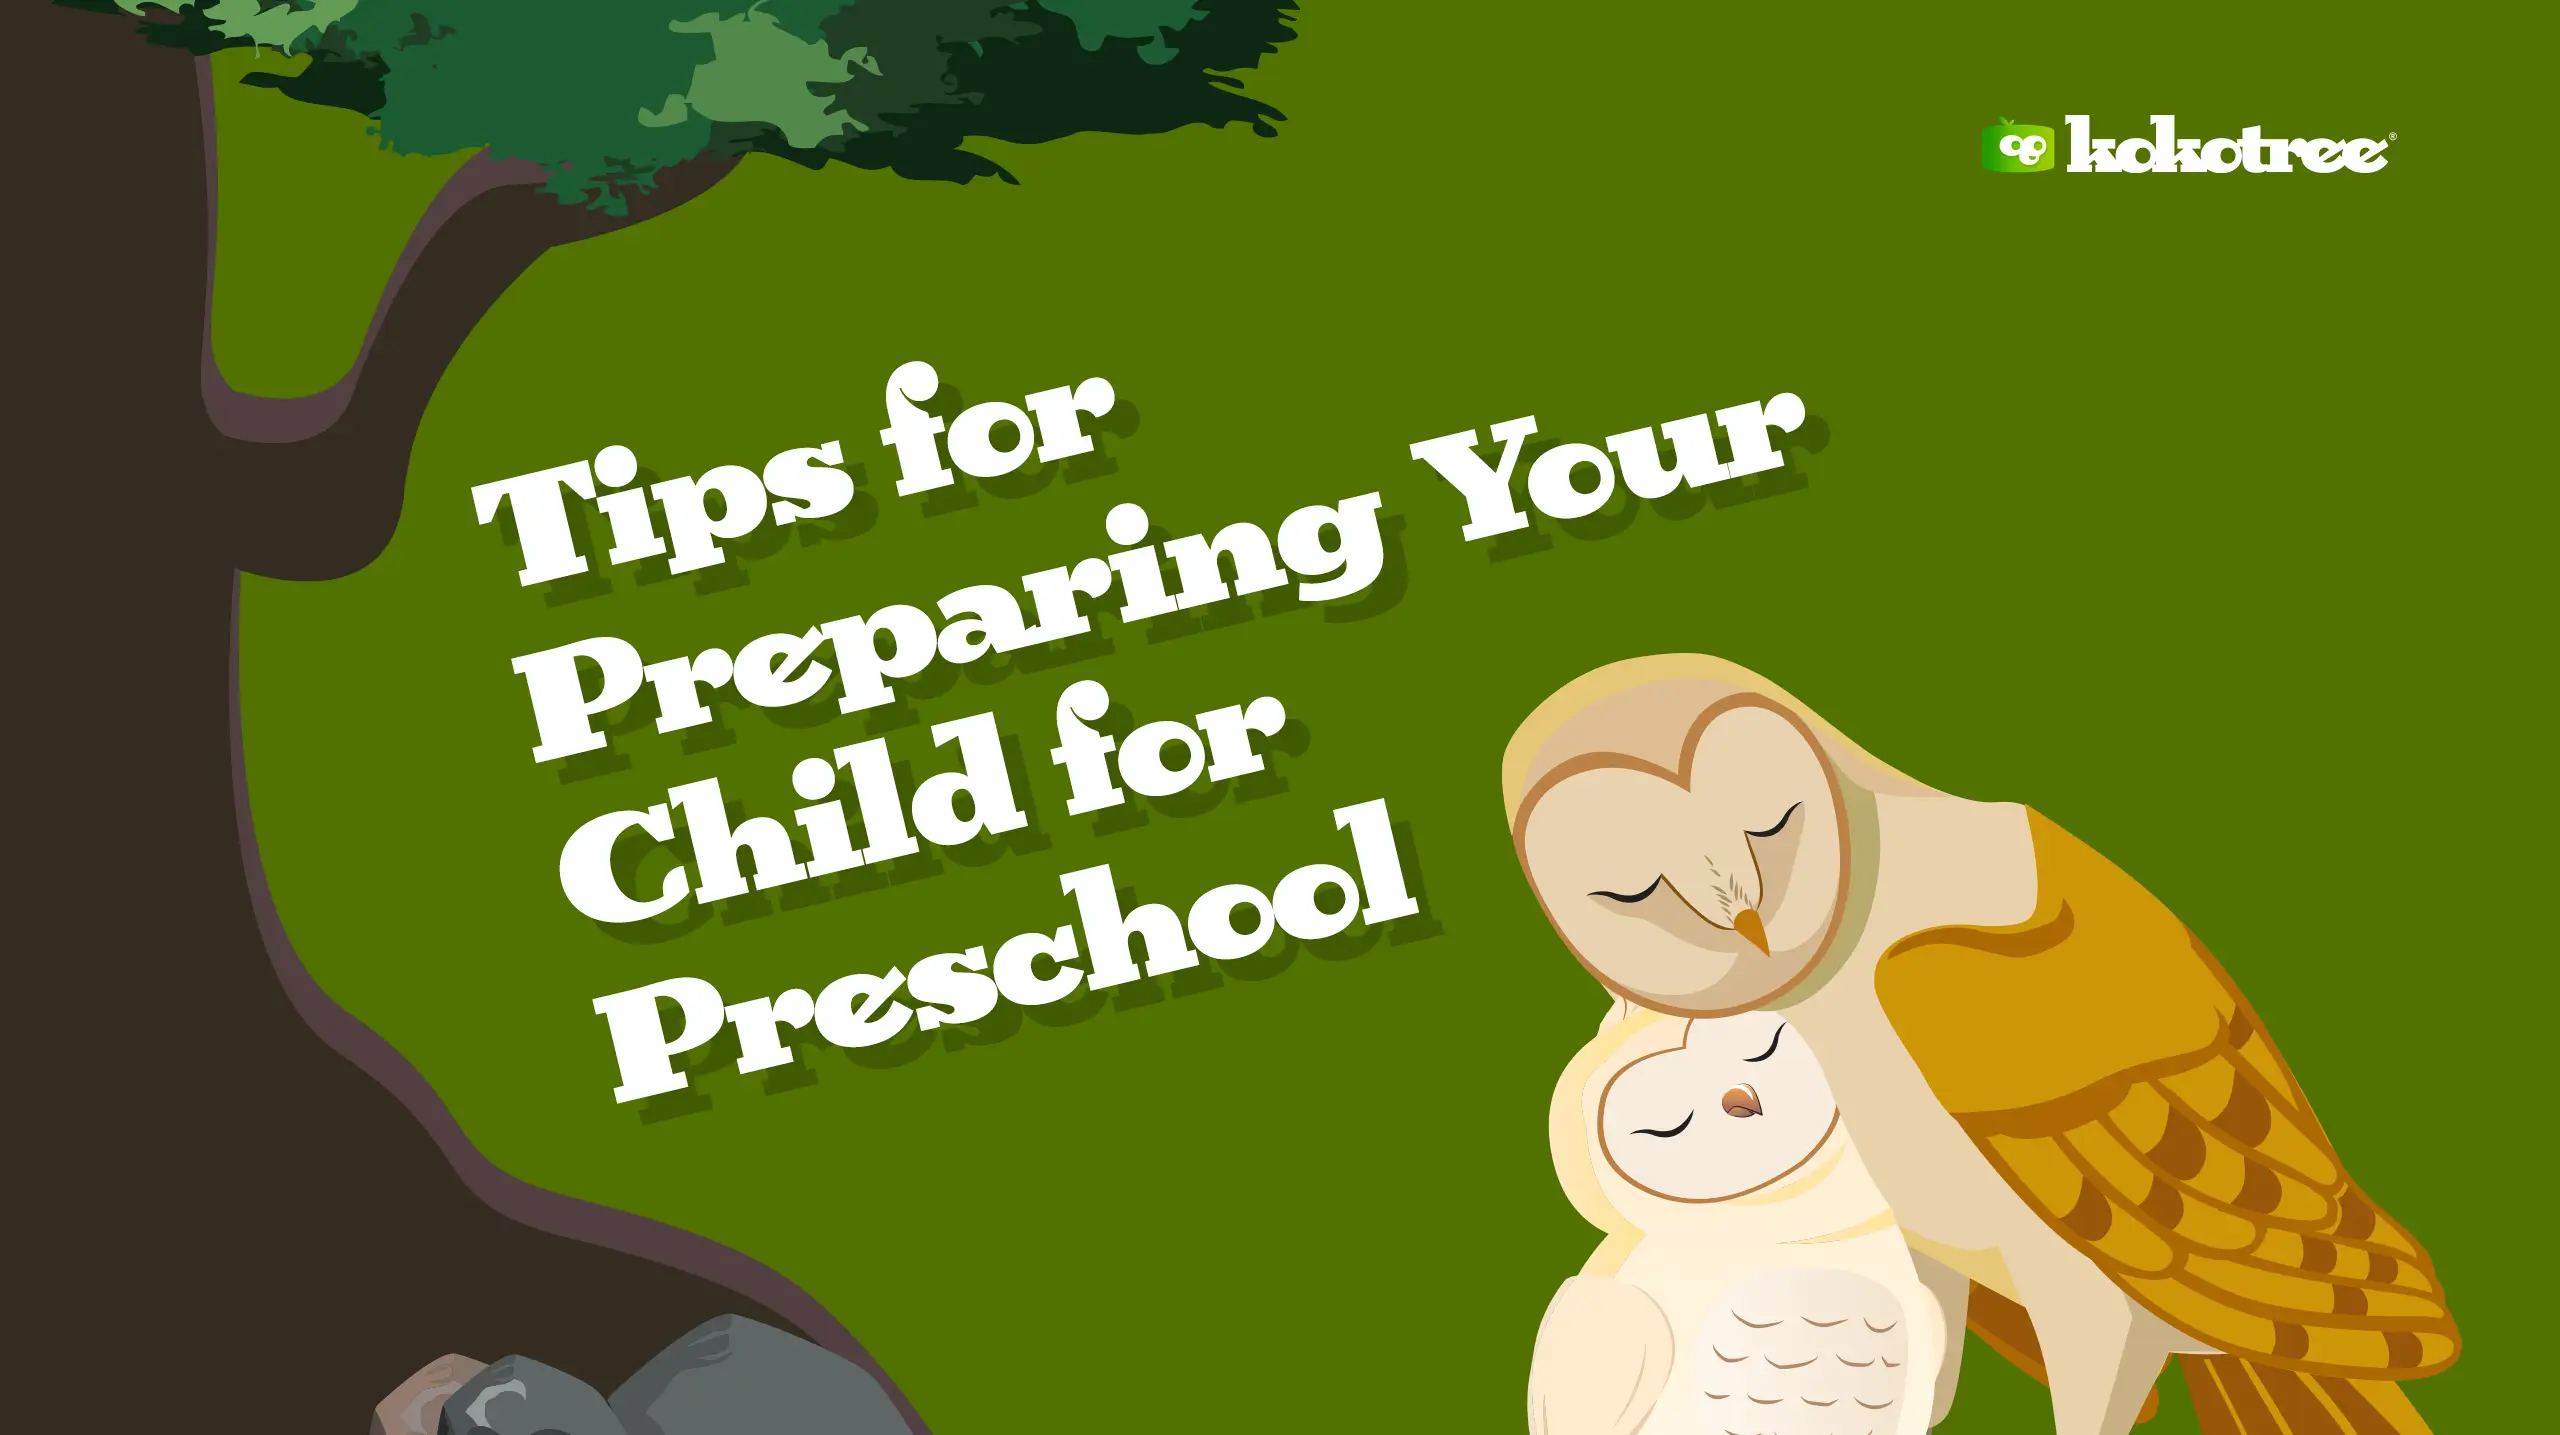 What are some tips for preparing your child for preschool?